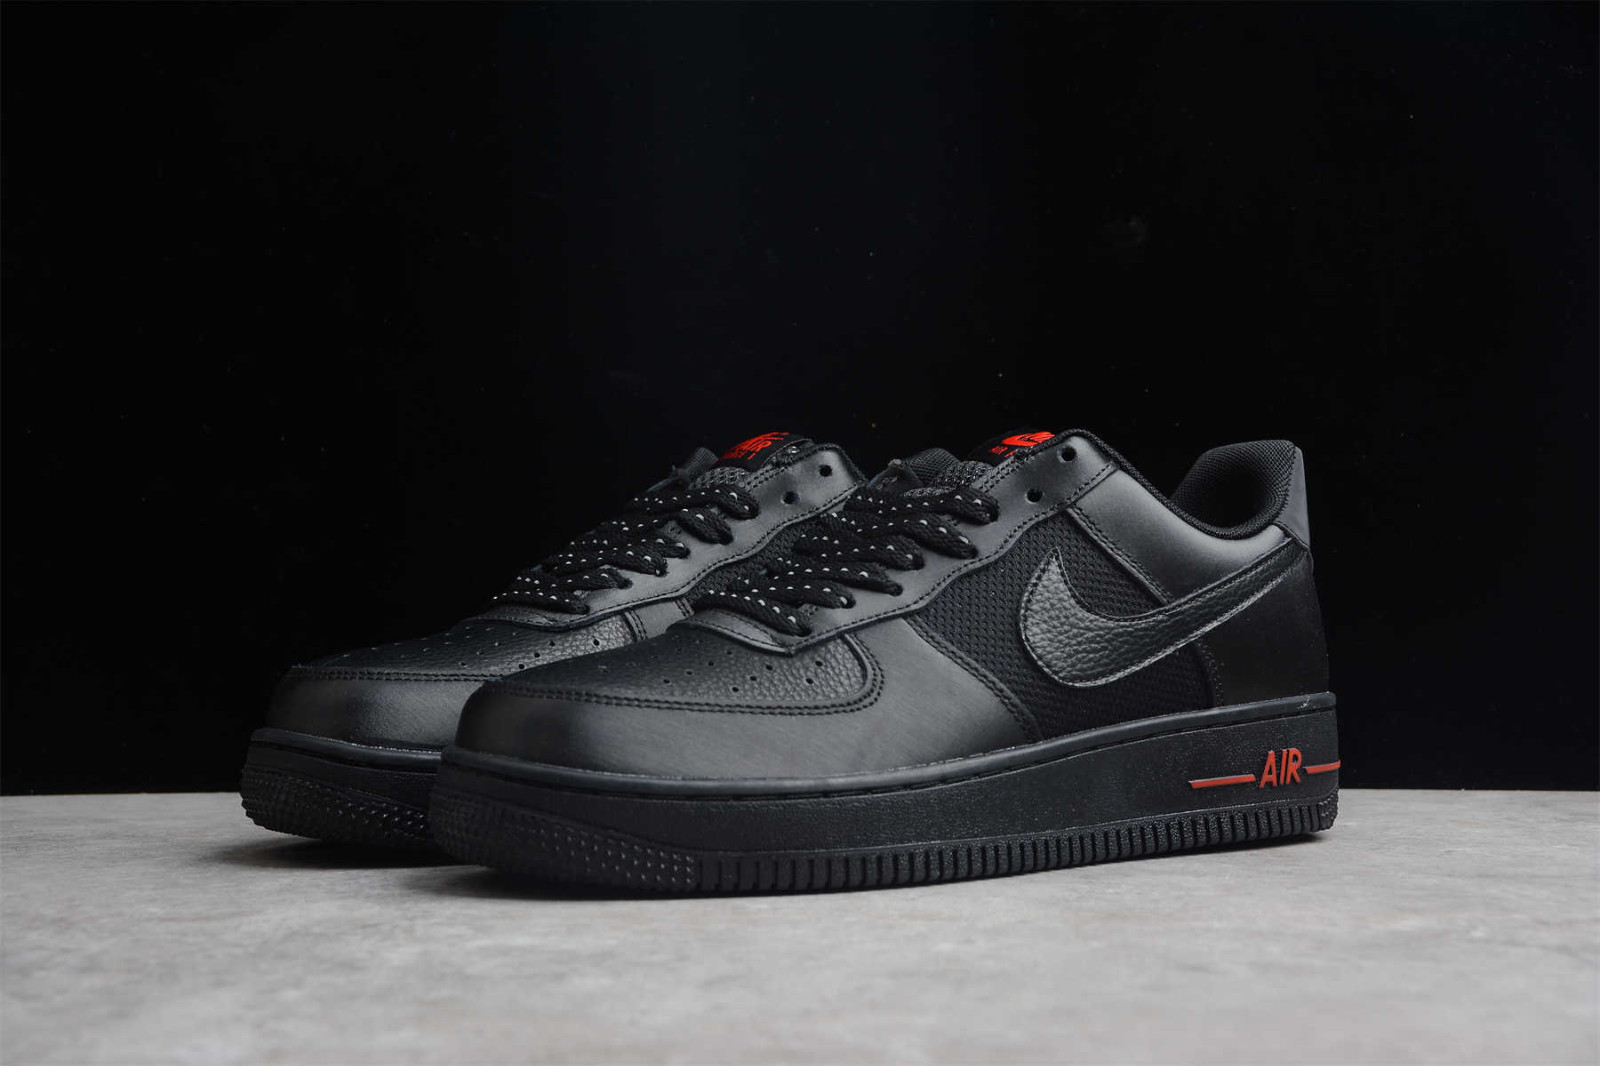 001 - StclaircomoShops Nike rogue Air Force 1 07 Low Black Red Running DO6359 - nike dunk bear pack for sale free template